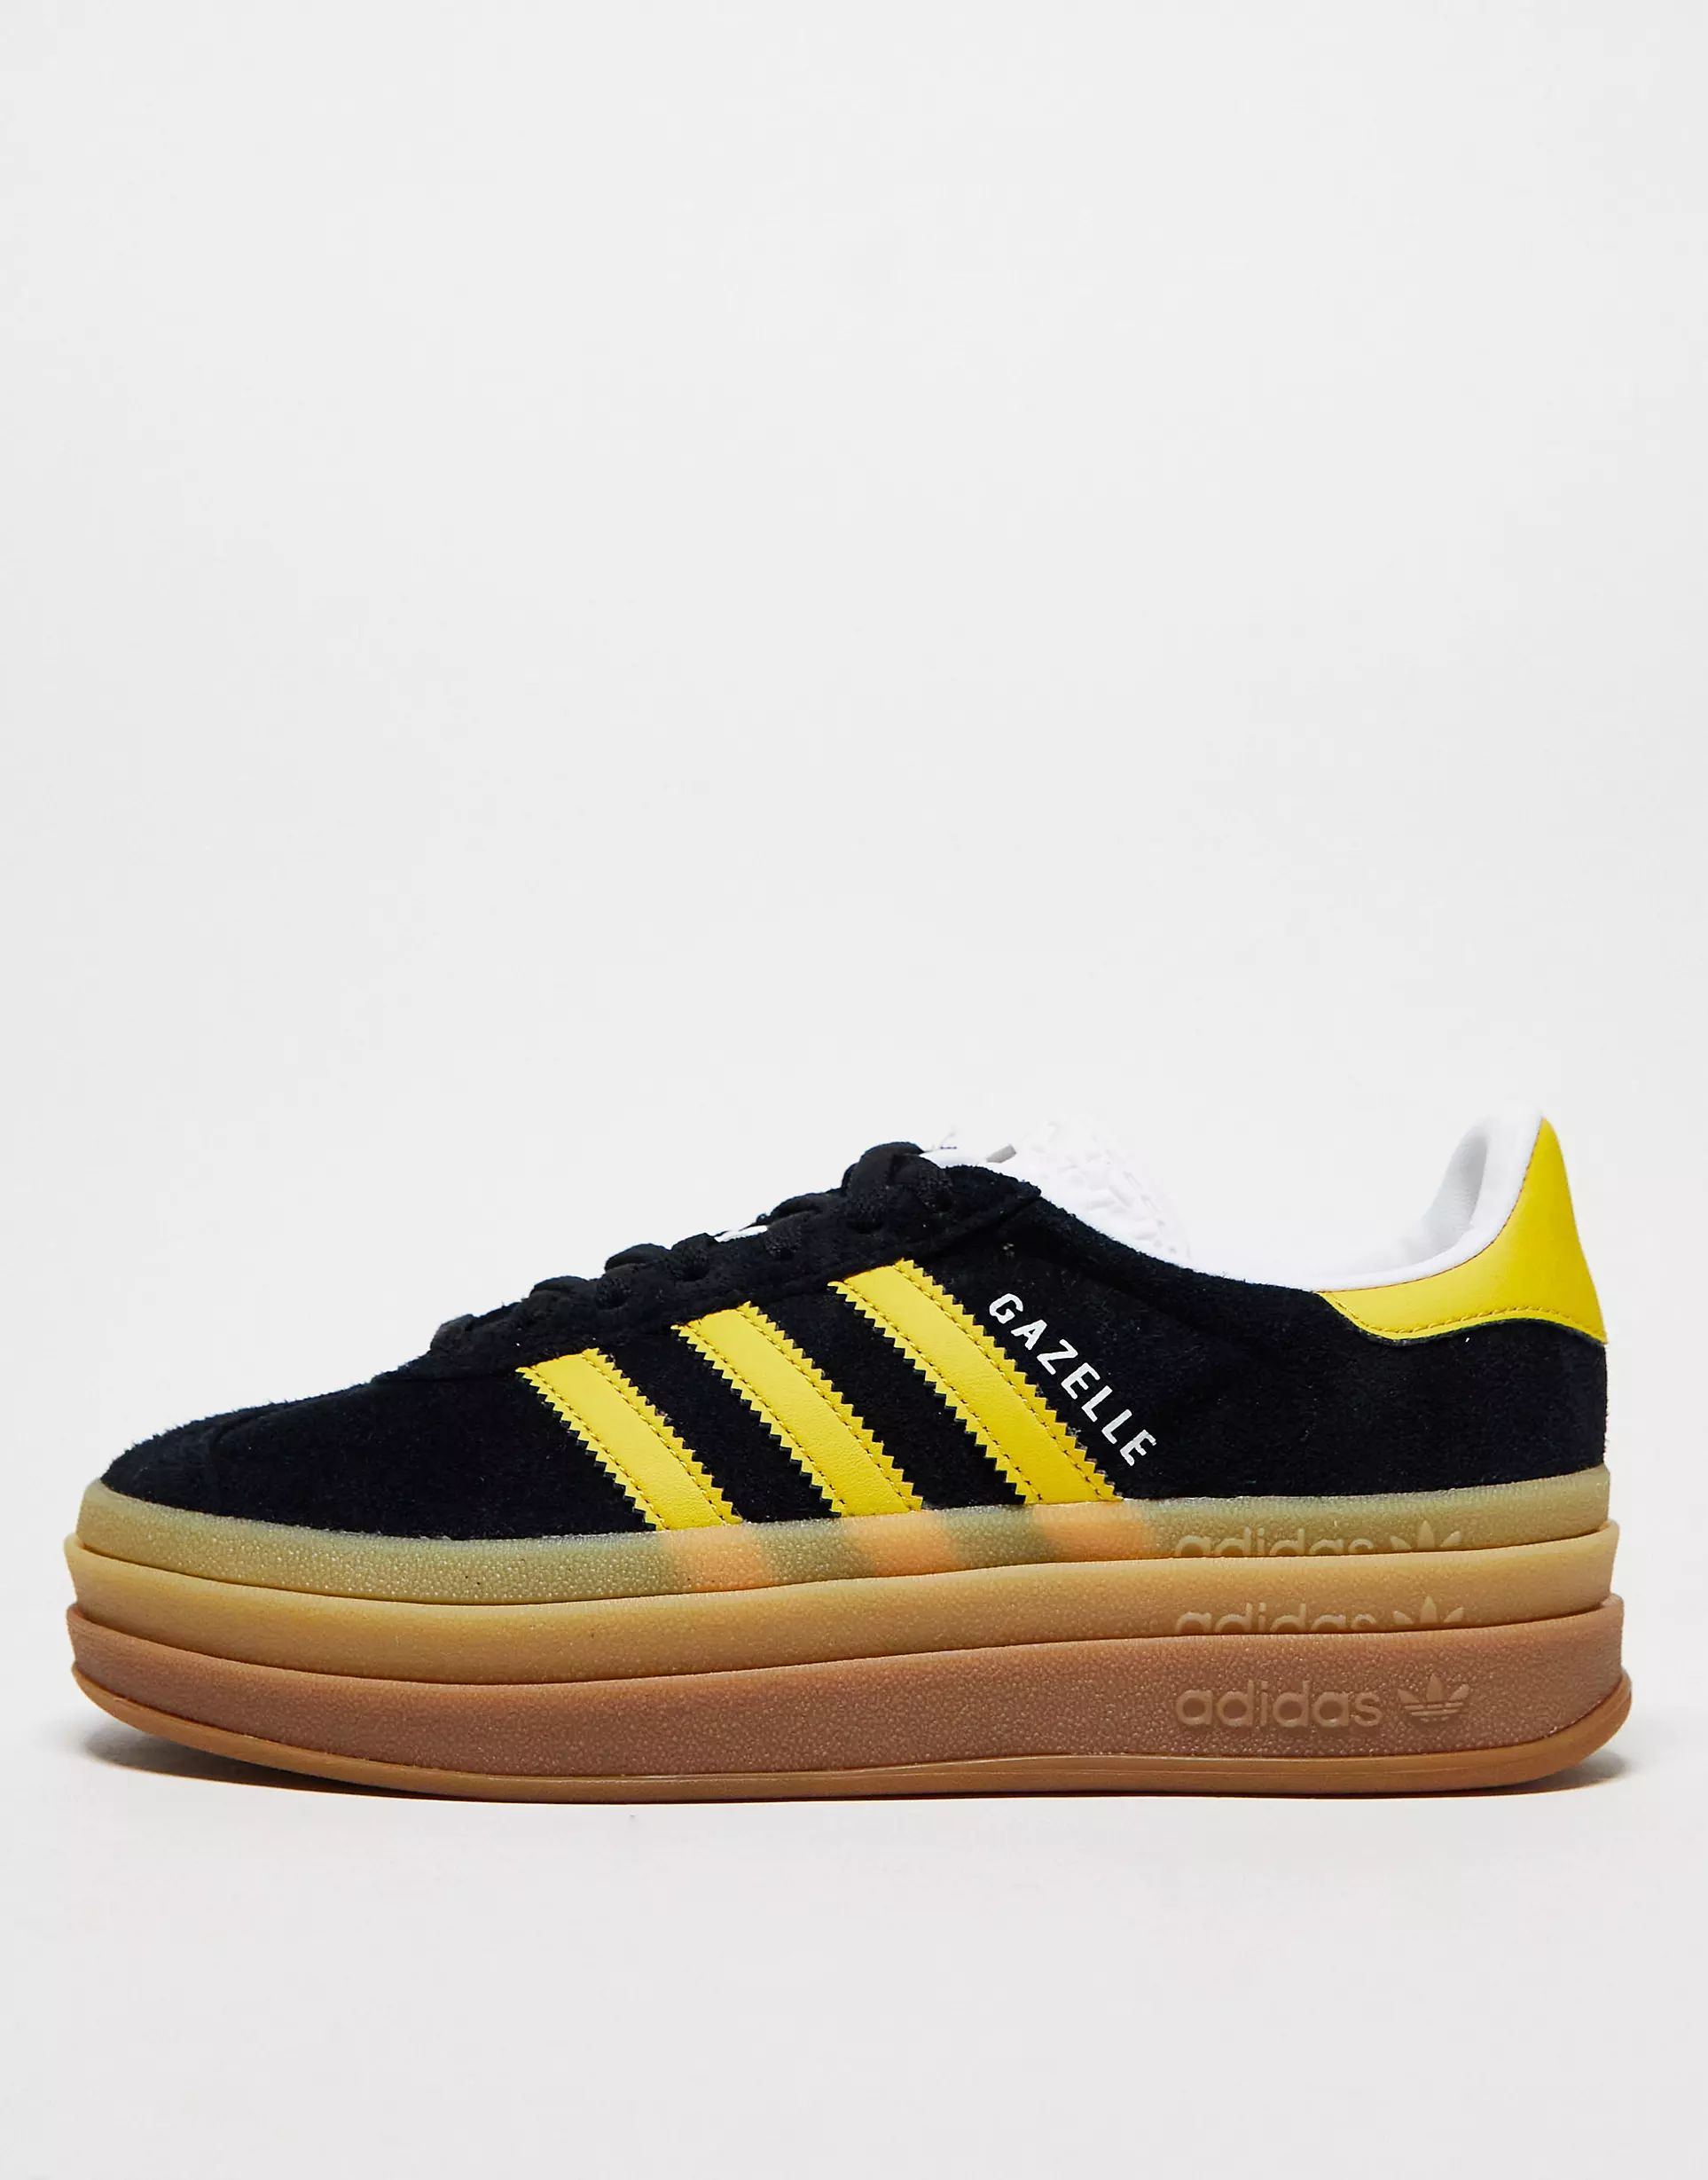 adidas Originals Gazelle Bold sneakers with gum sole in black and yellow | ASOS (Global)